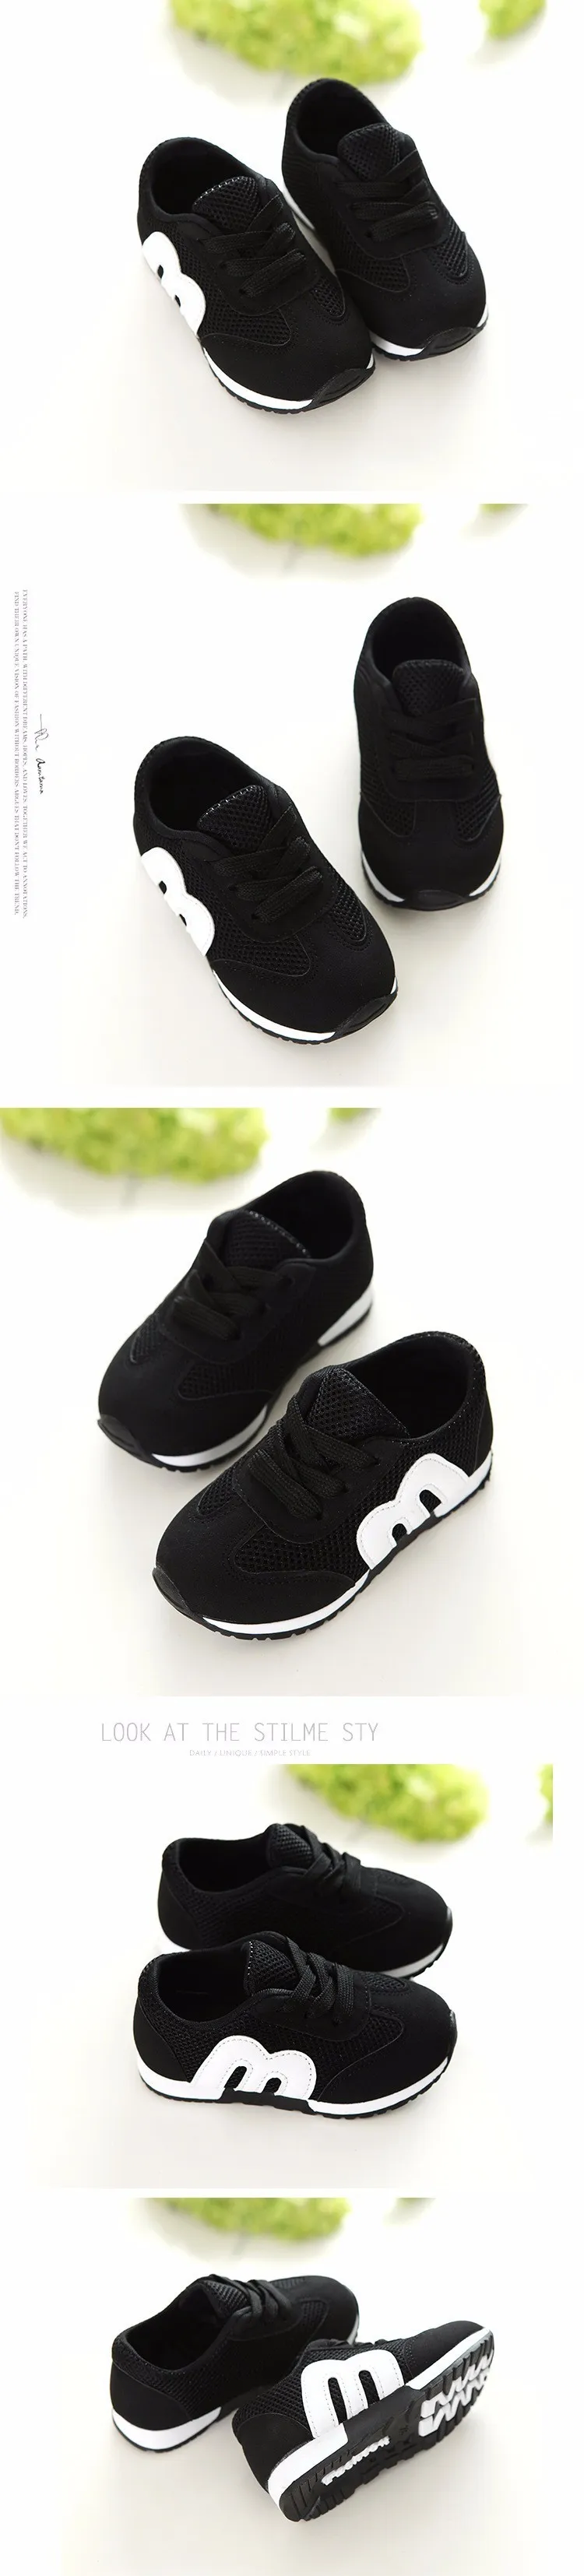 x3 baby shoes sport